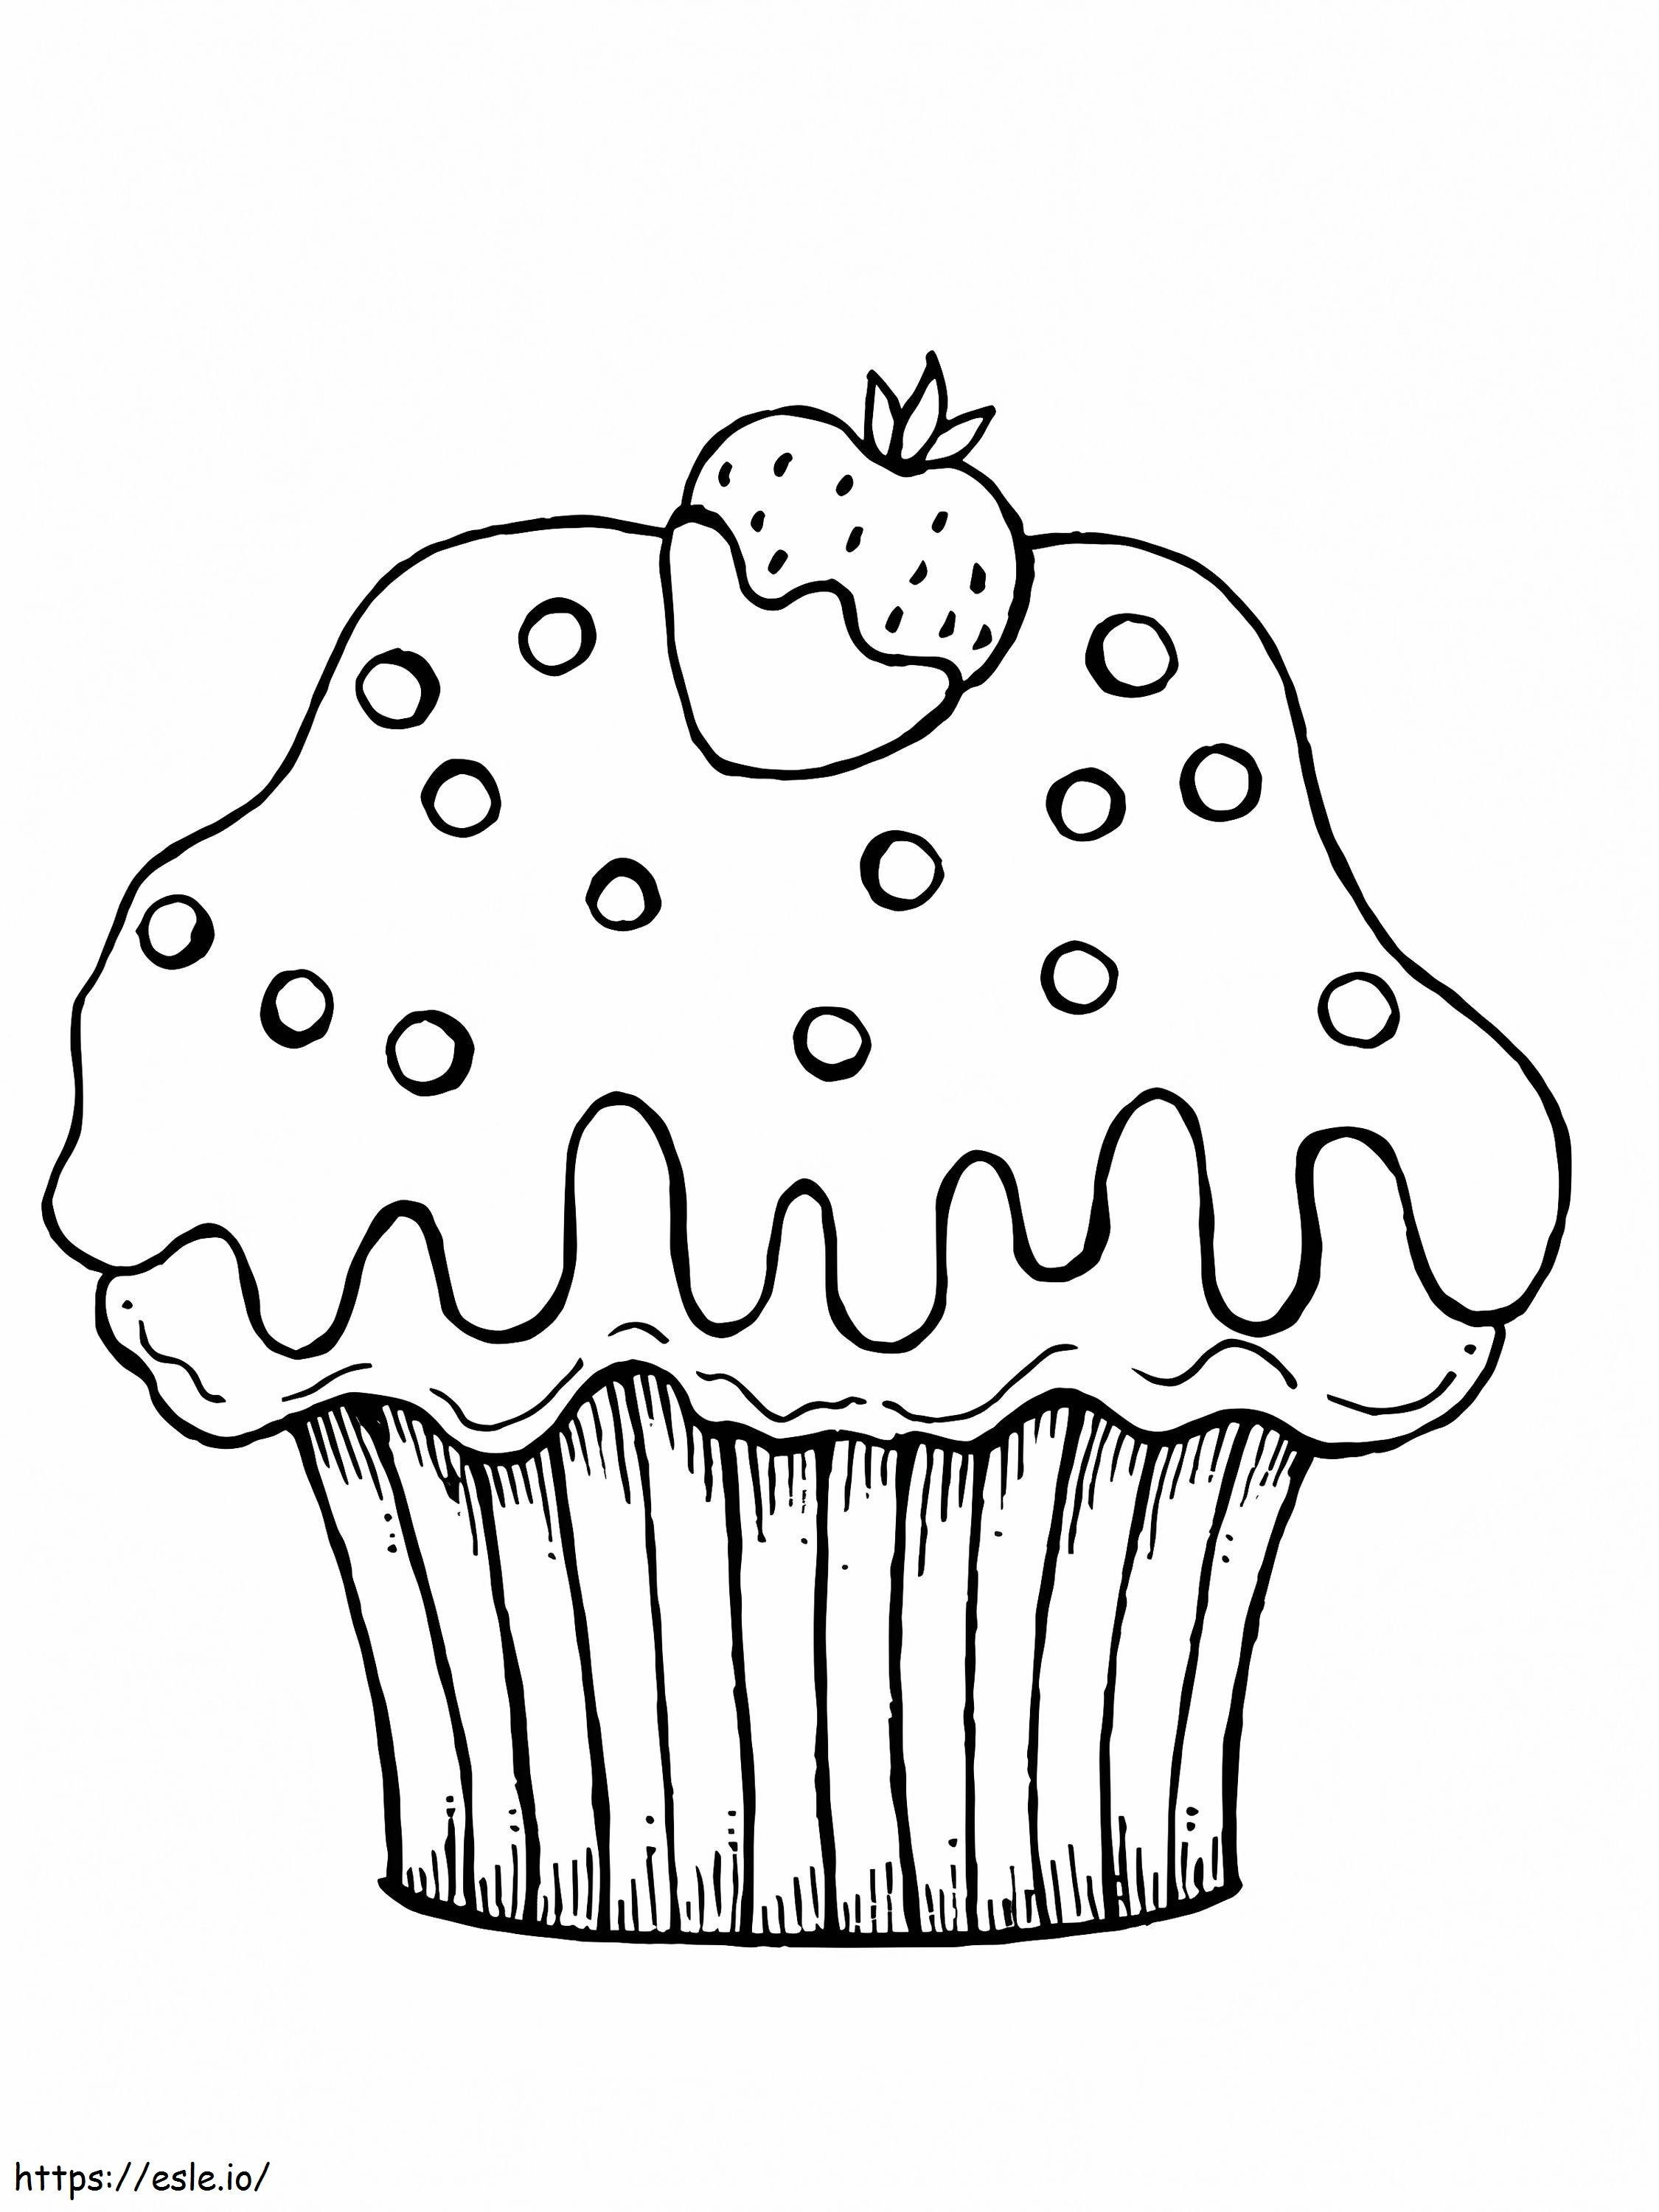 Melting Cupcake And Strawberry coloring page